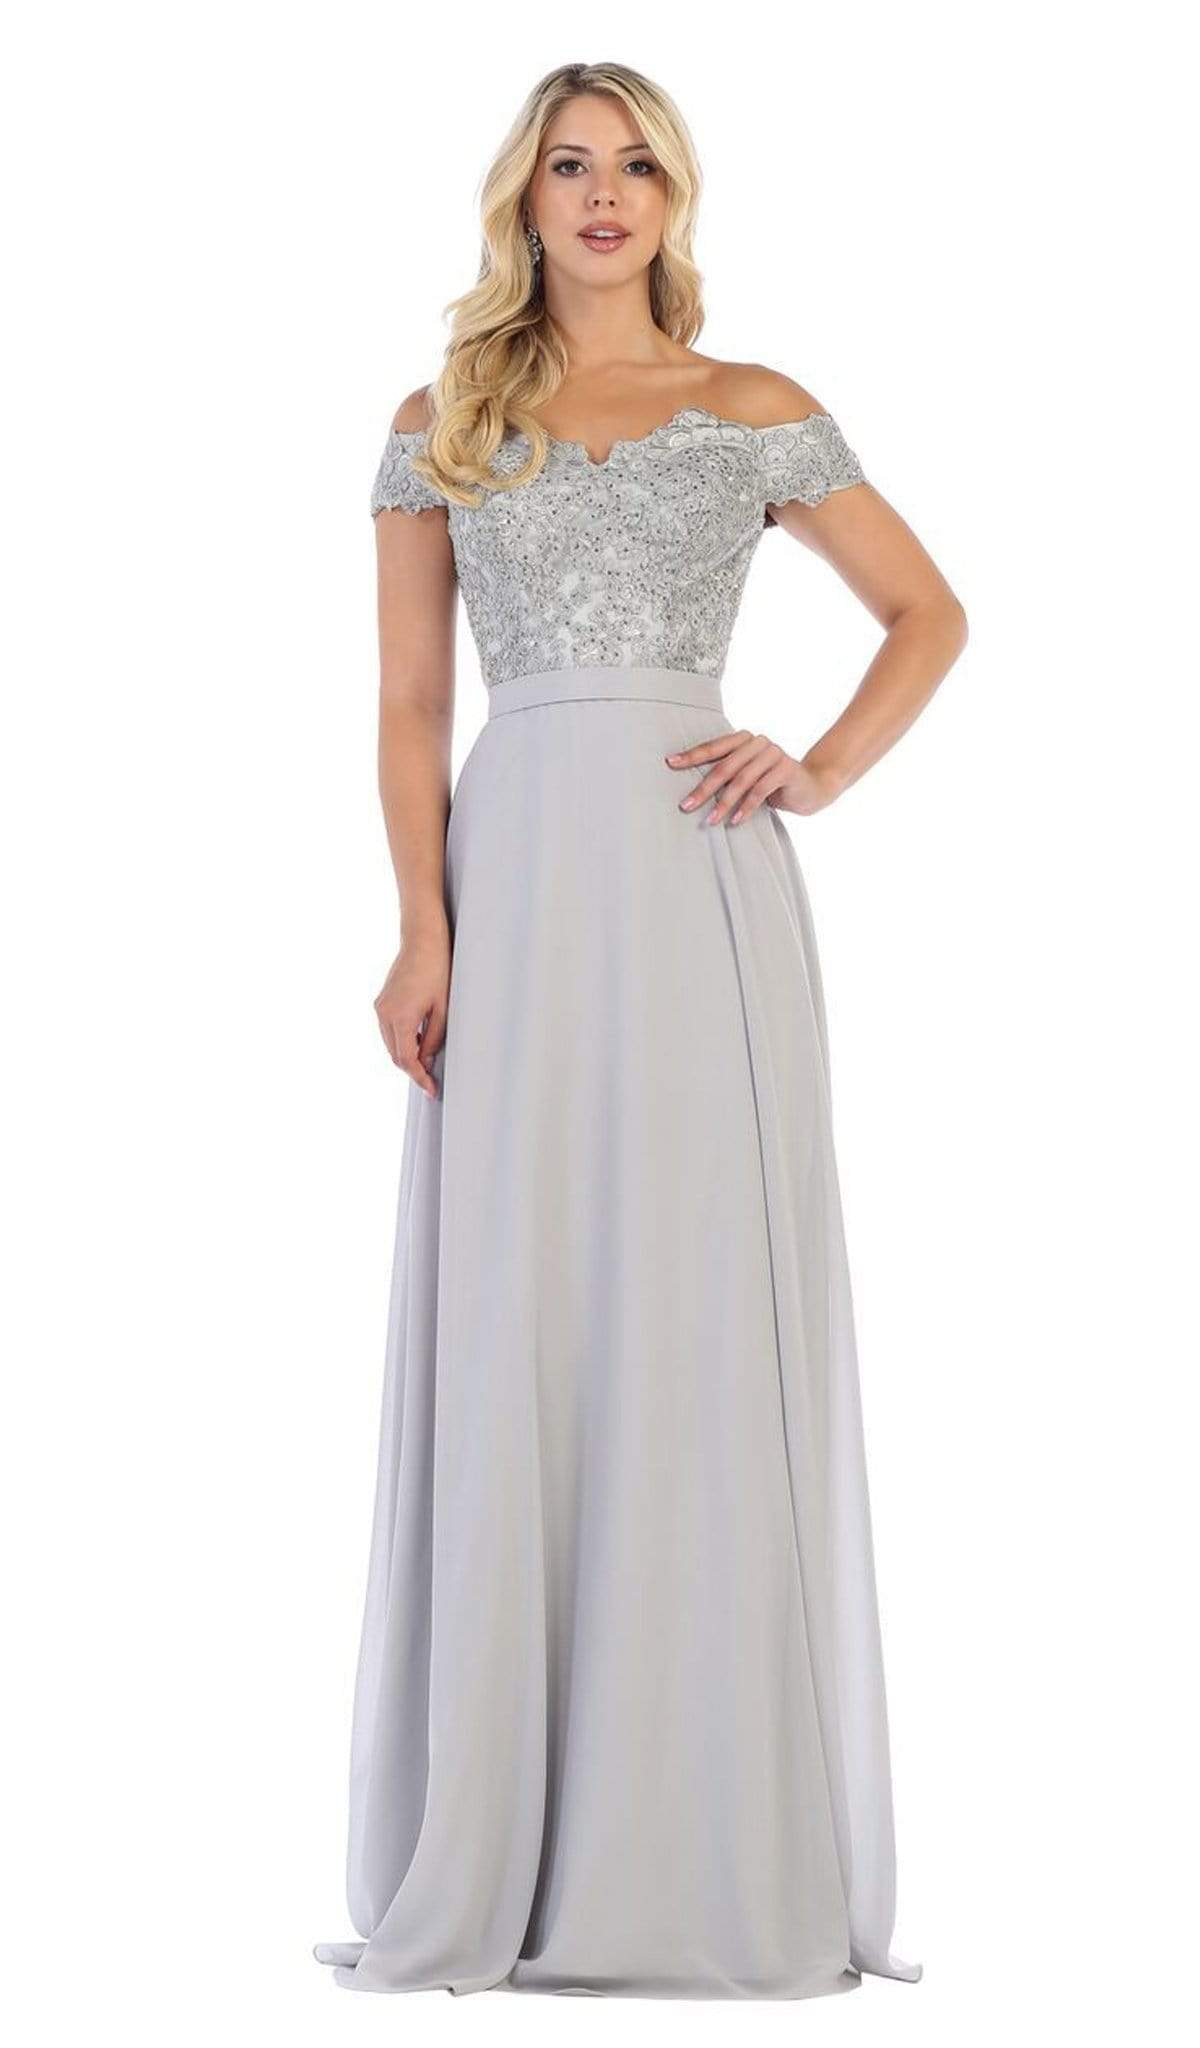 May Queen - MQ1601 Lace Appliqued Chiffon Off Shoulder Formal Gown
